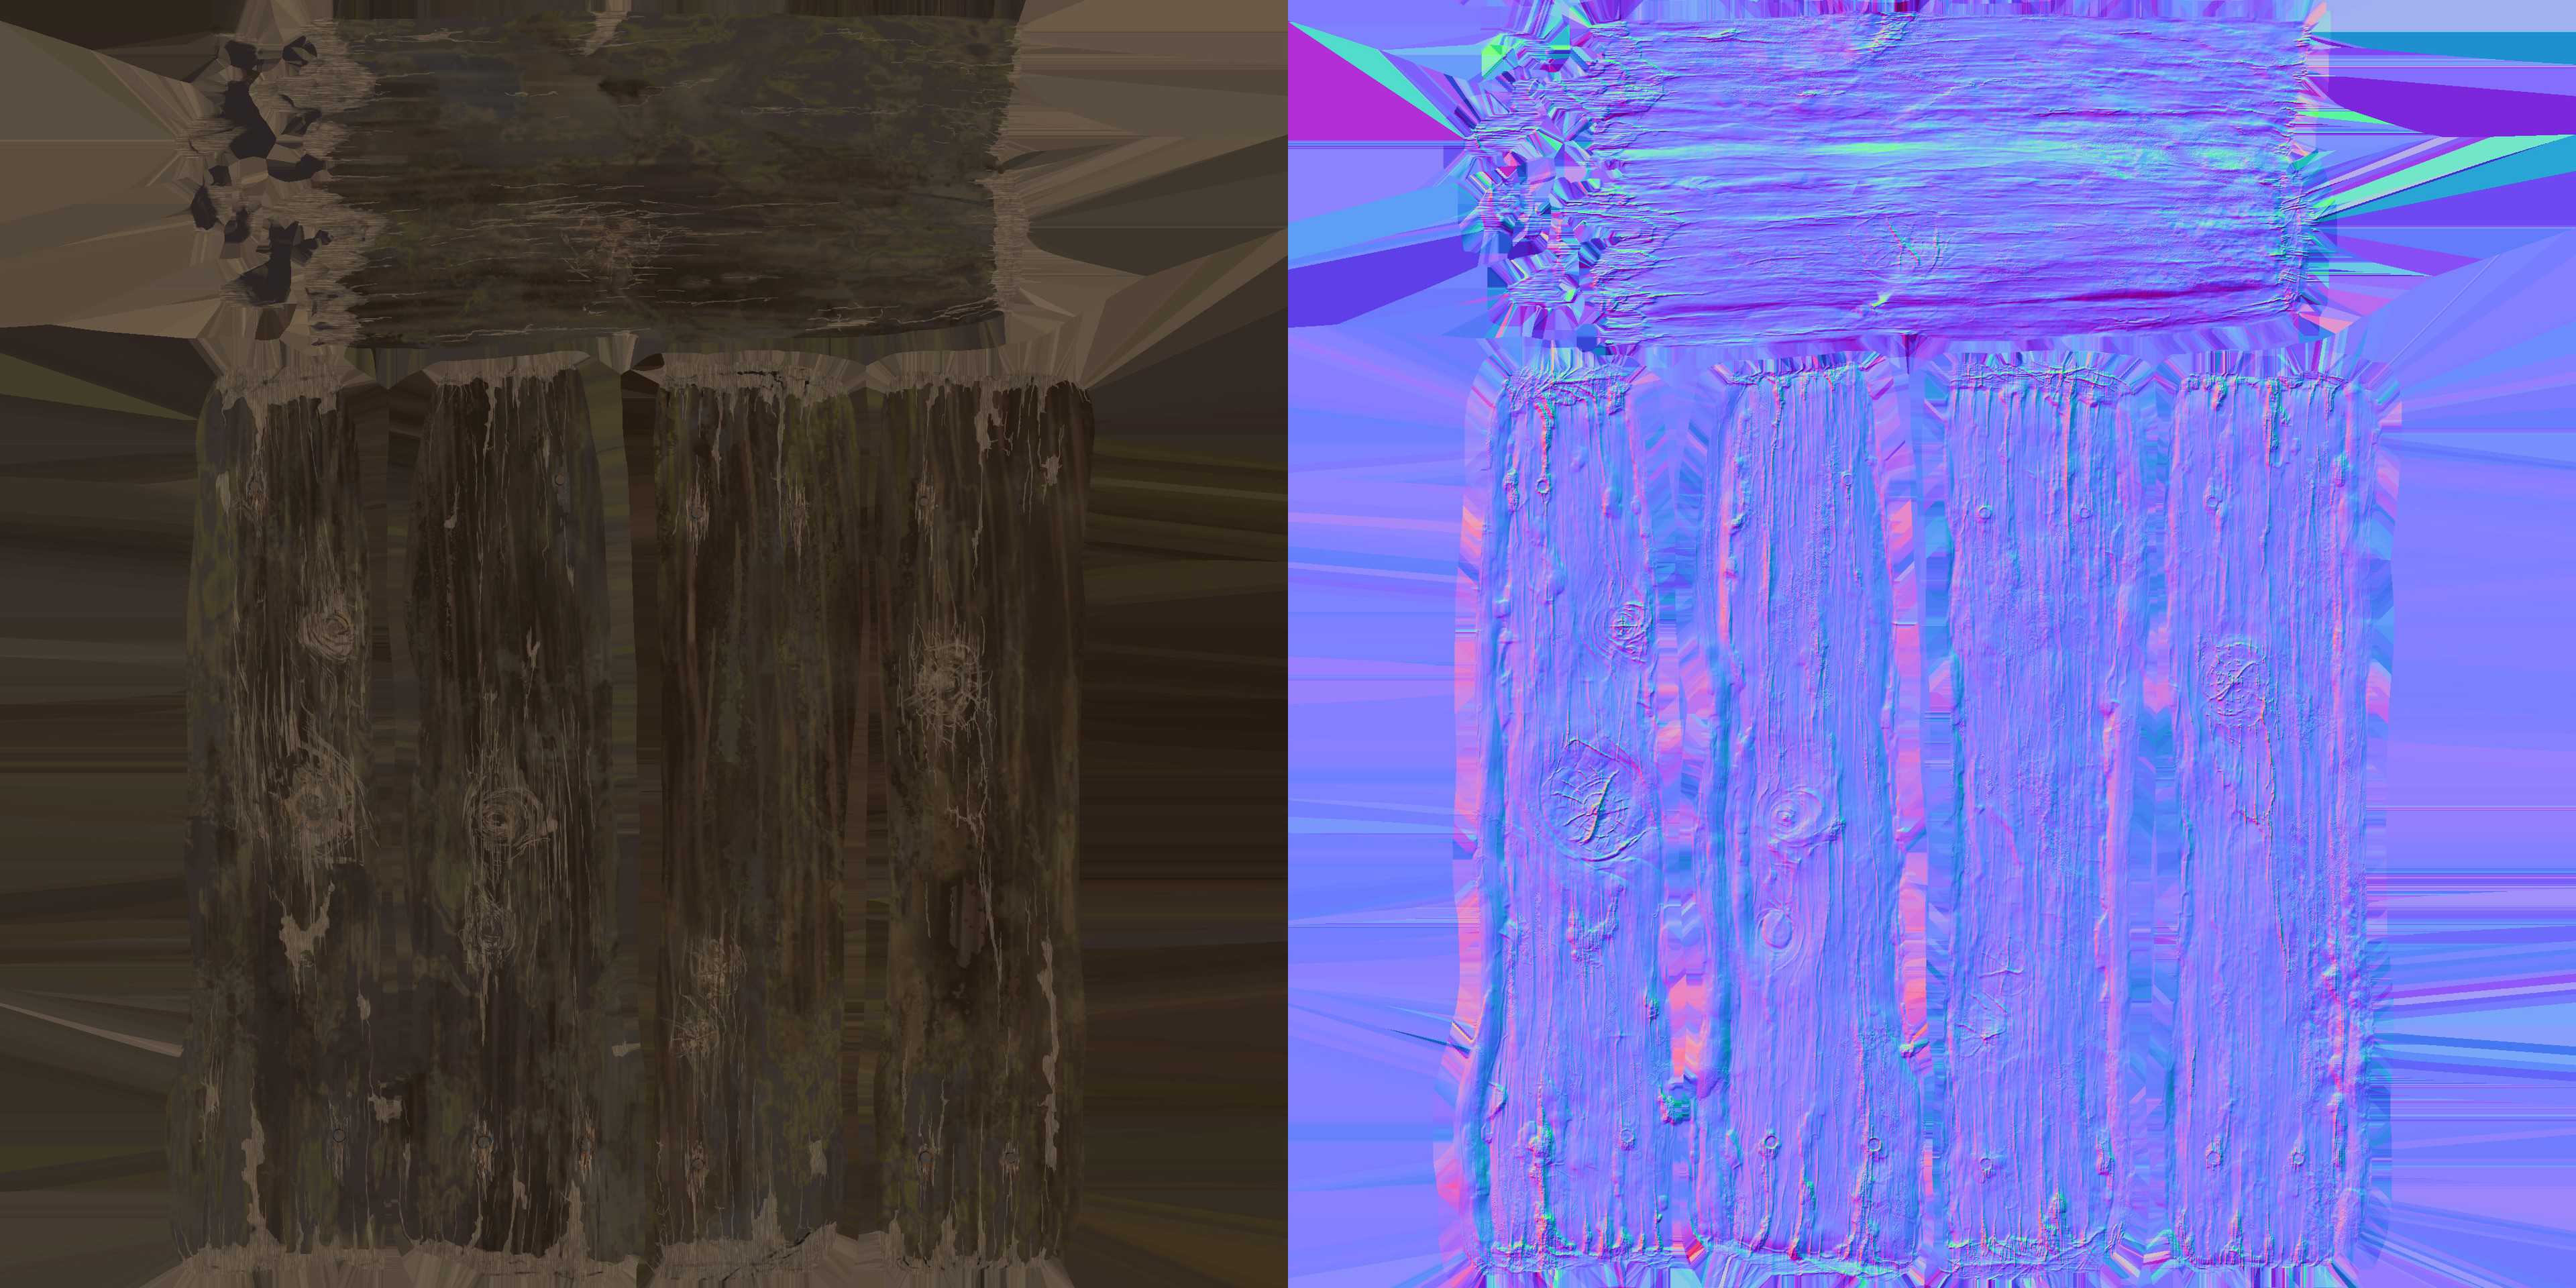 Final albedo and normal map